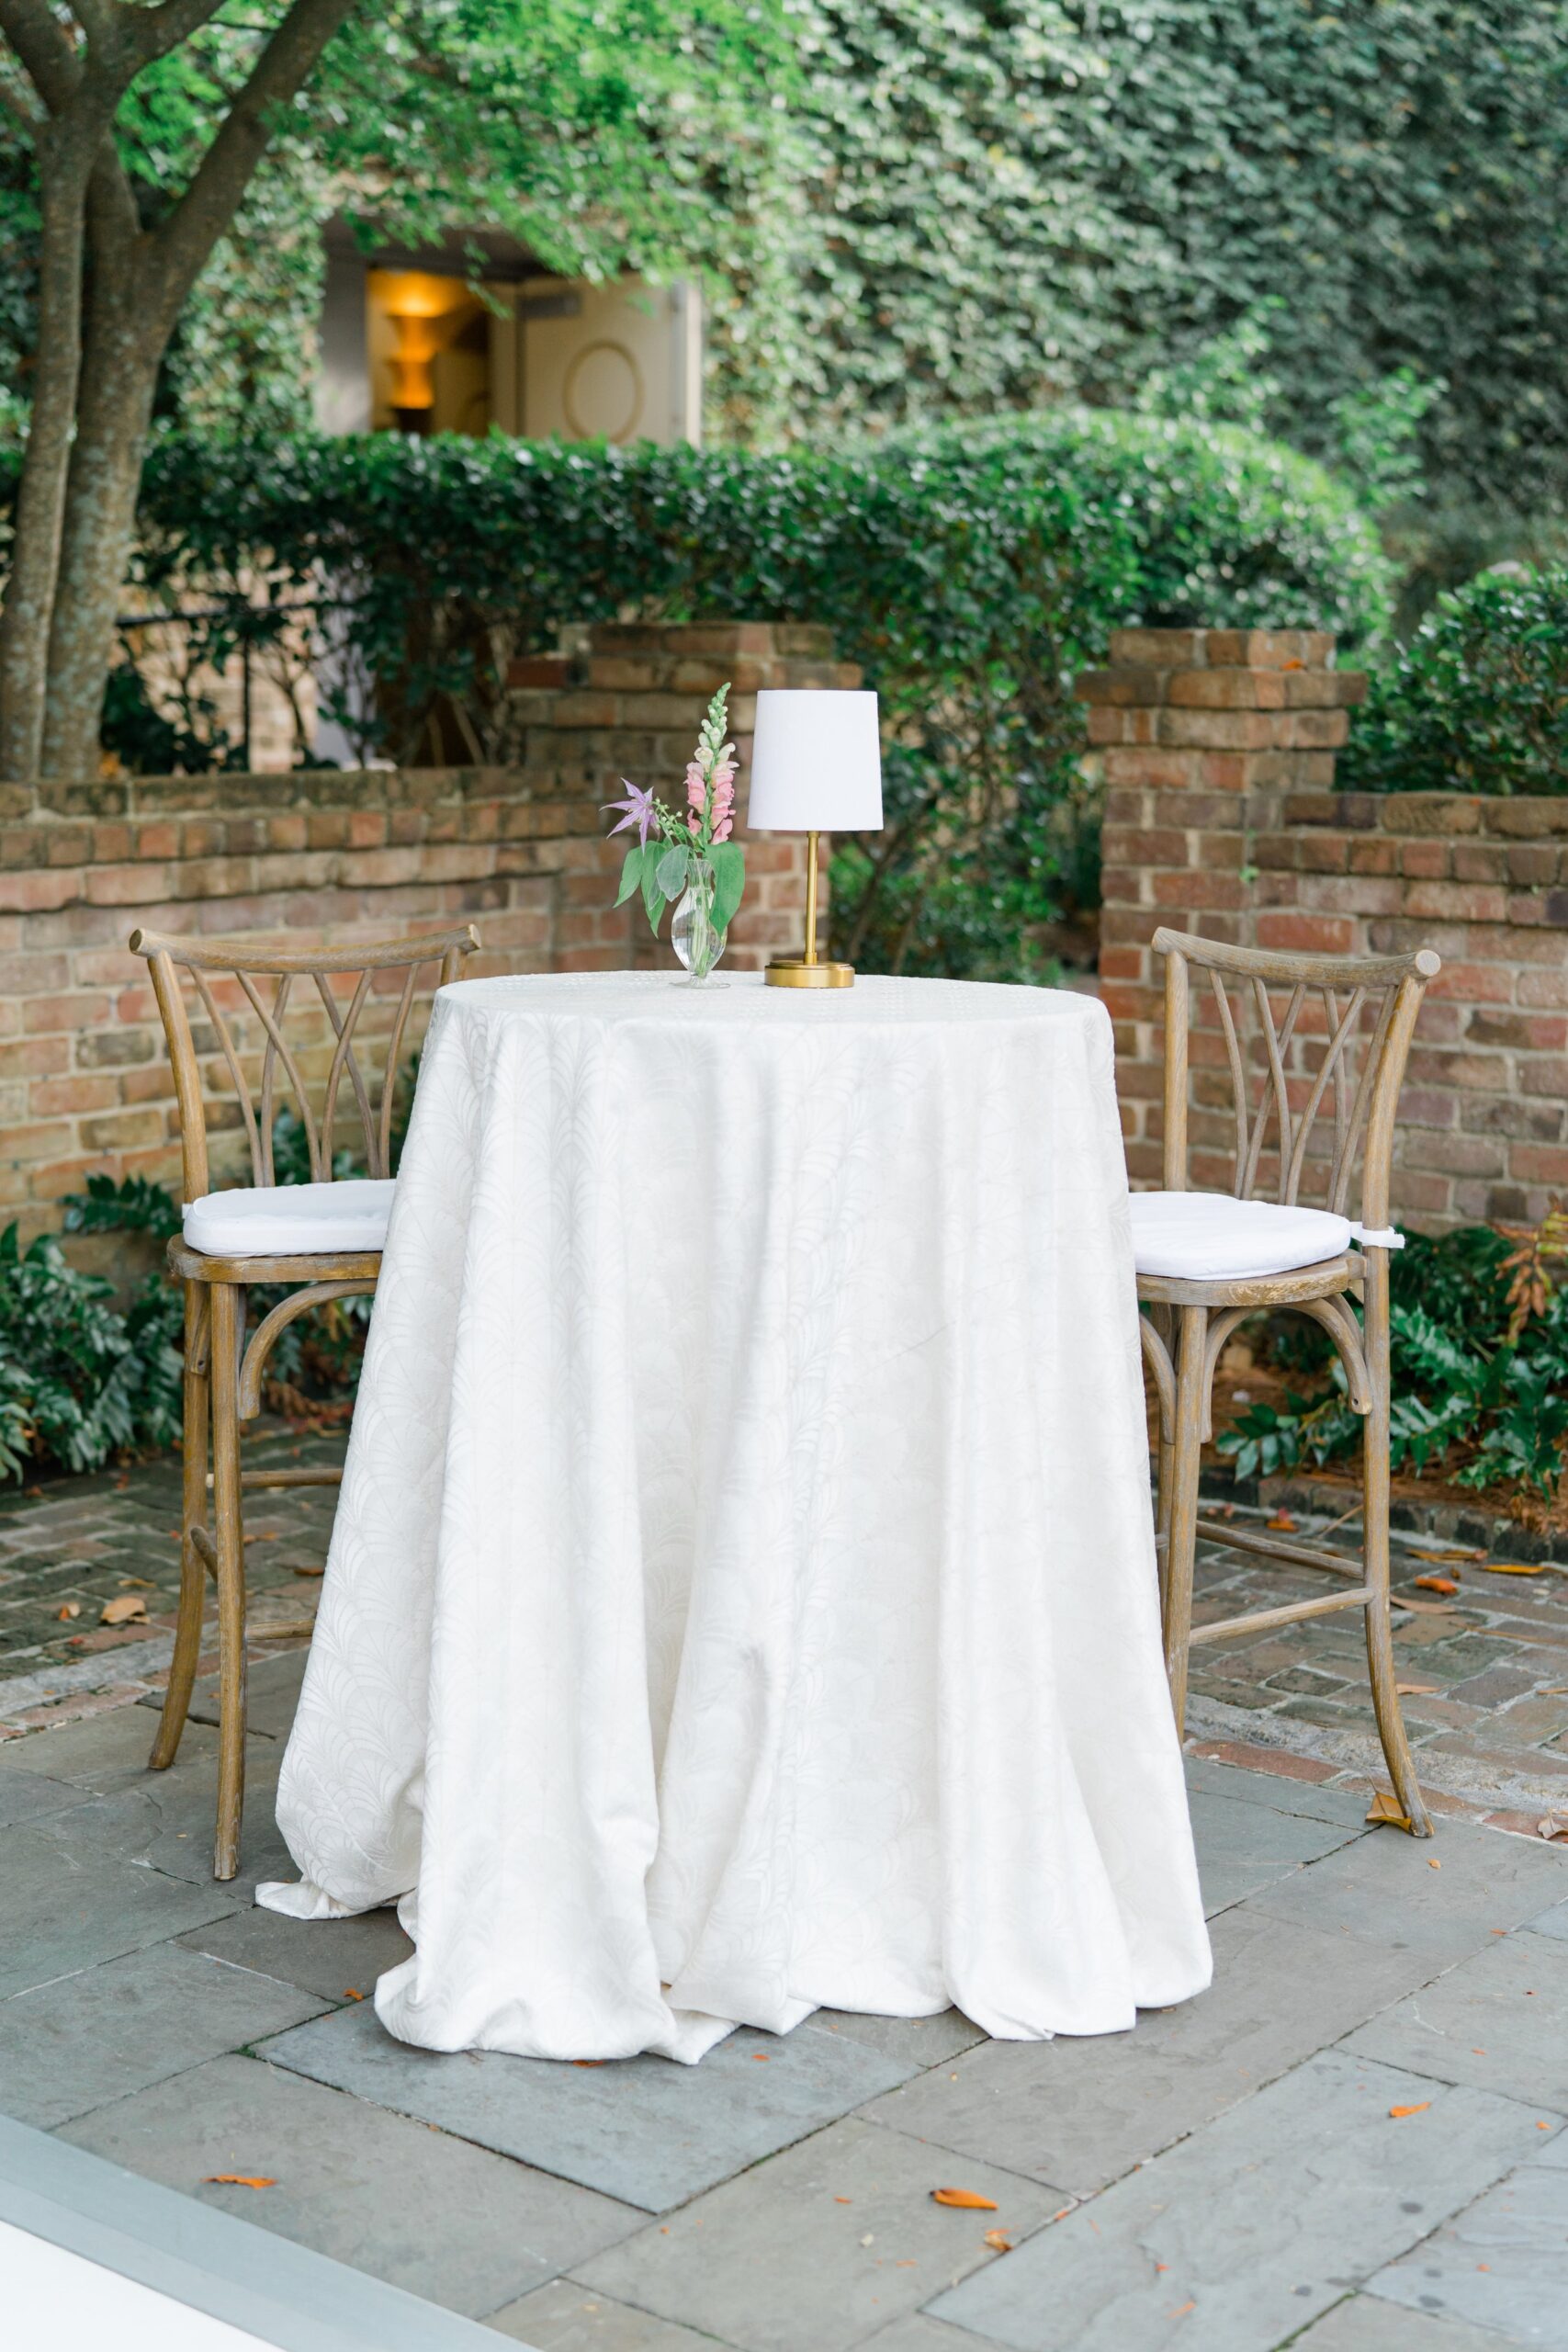 classy high cocktail table with textured tablecloth and small lamp.